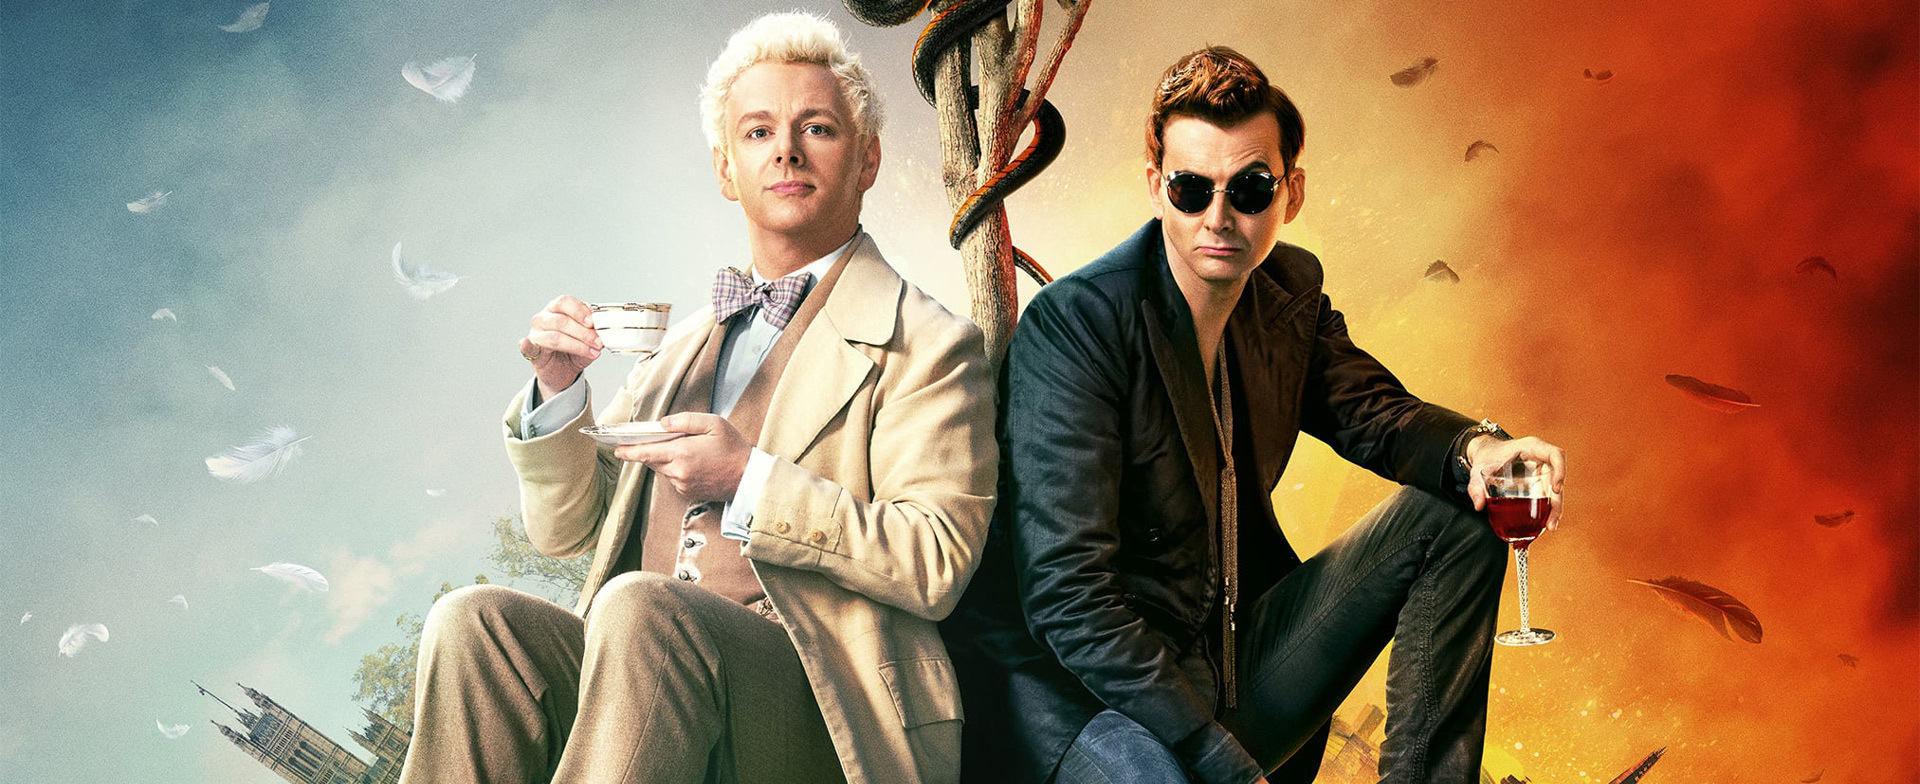 Where To Watch Good Omens Stream Every Episode Online 44 Off 3406